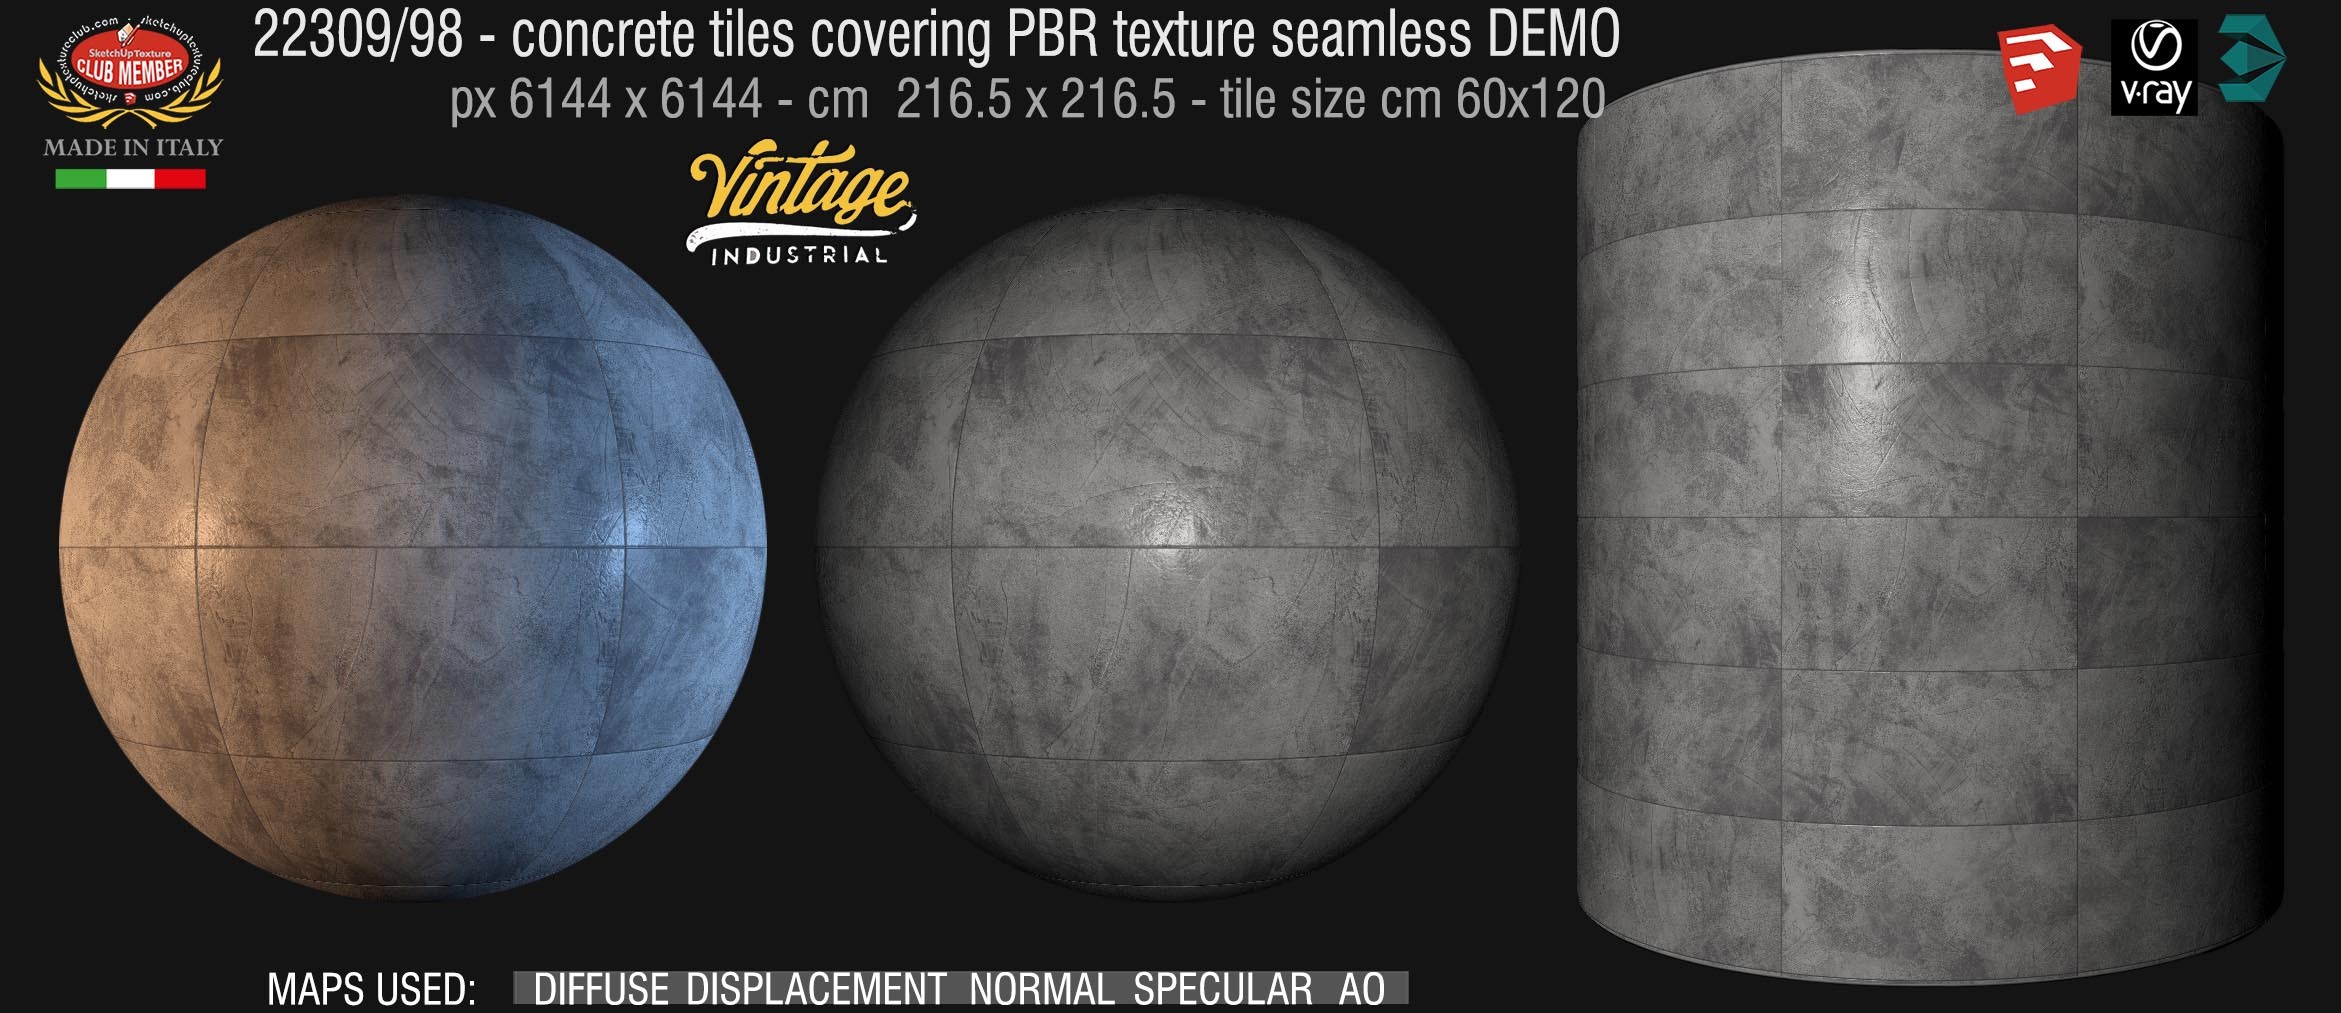 22309_98 concrete tiles covering PBR texture seamless DEMO